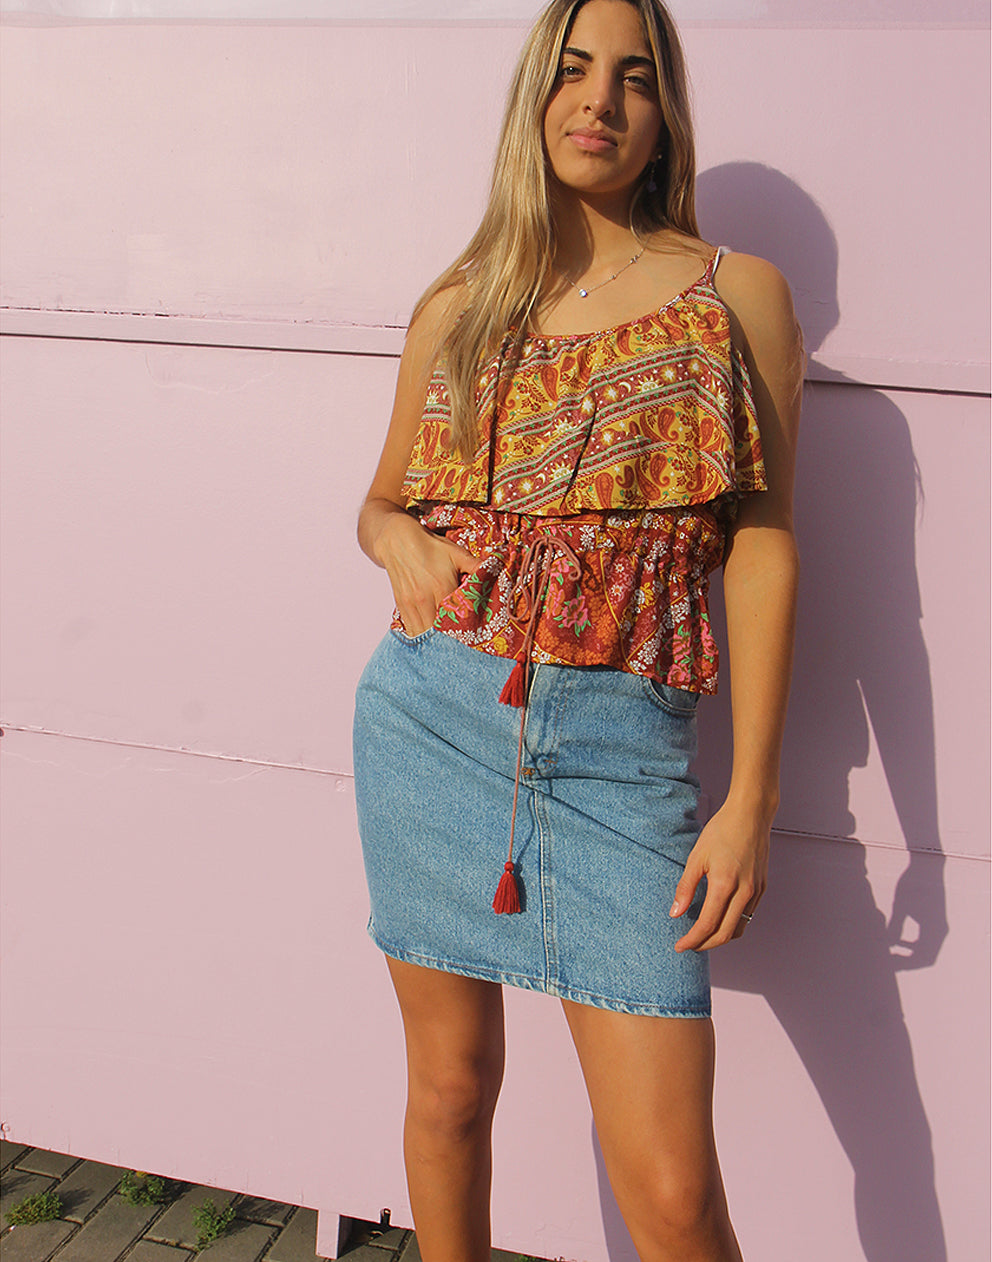 Red & Yellow Paisley & Floral Print Sleeveless Bohemian Style Top